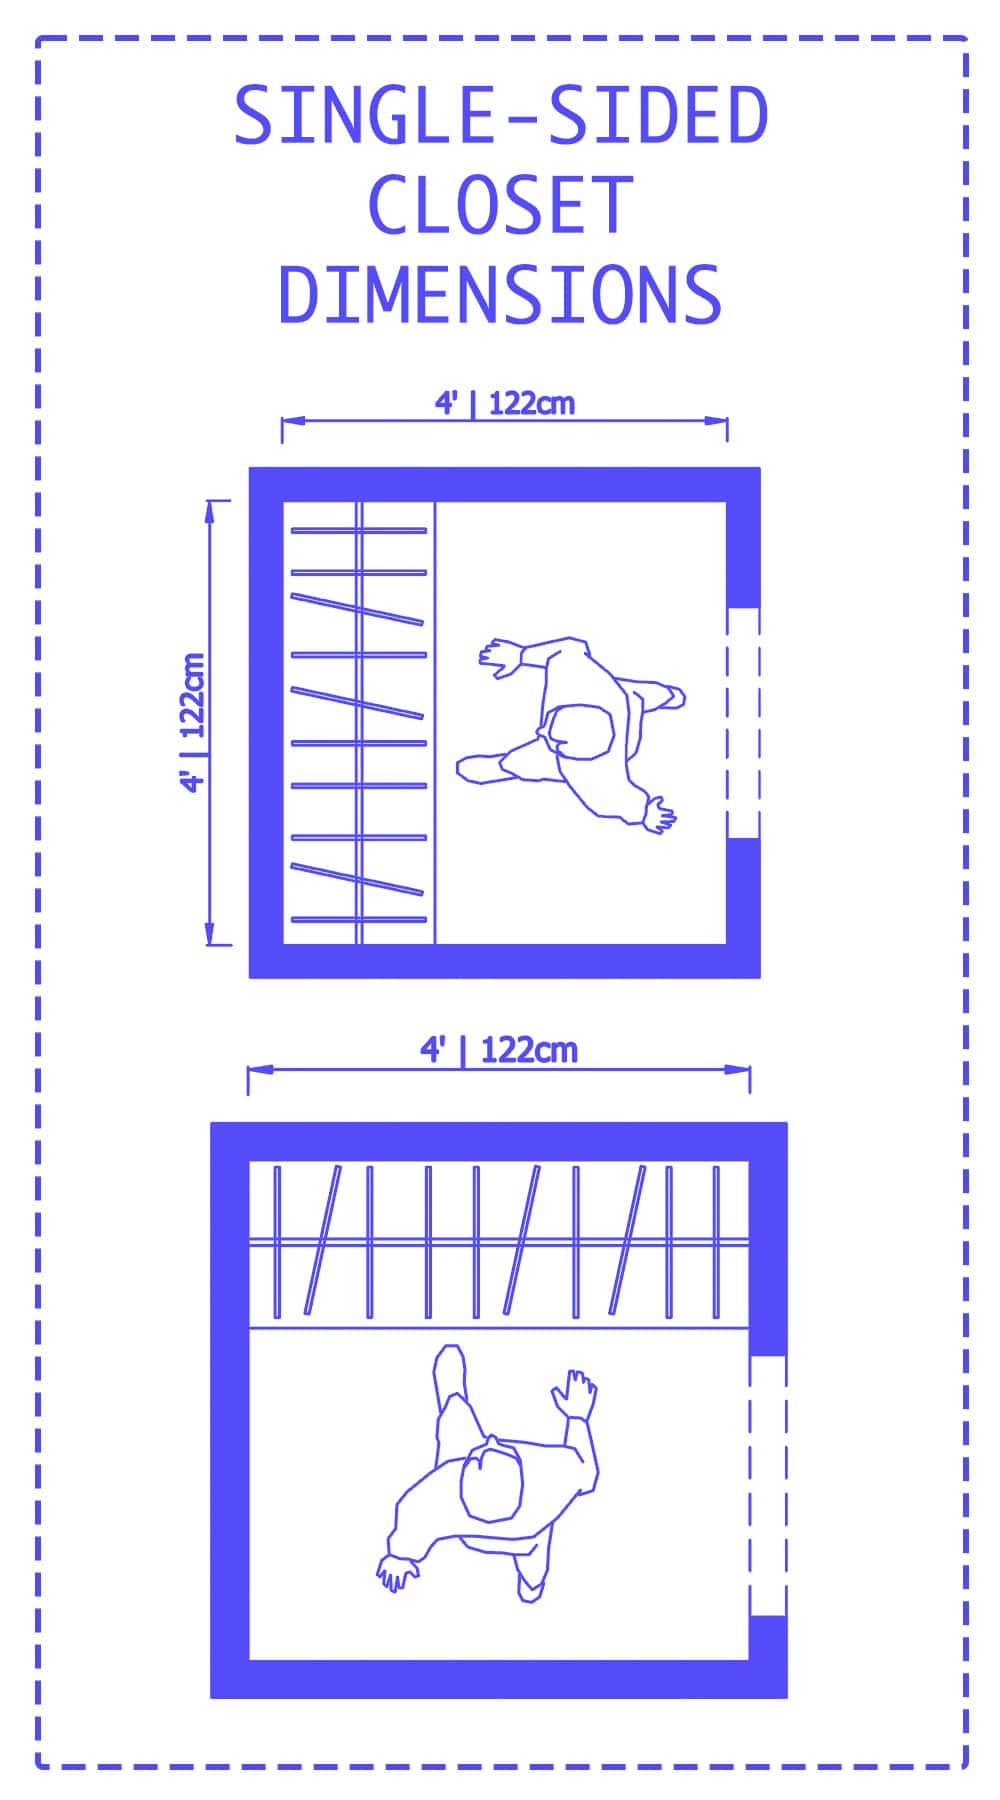 Single sided Closet Dimensions